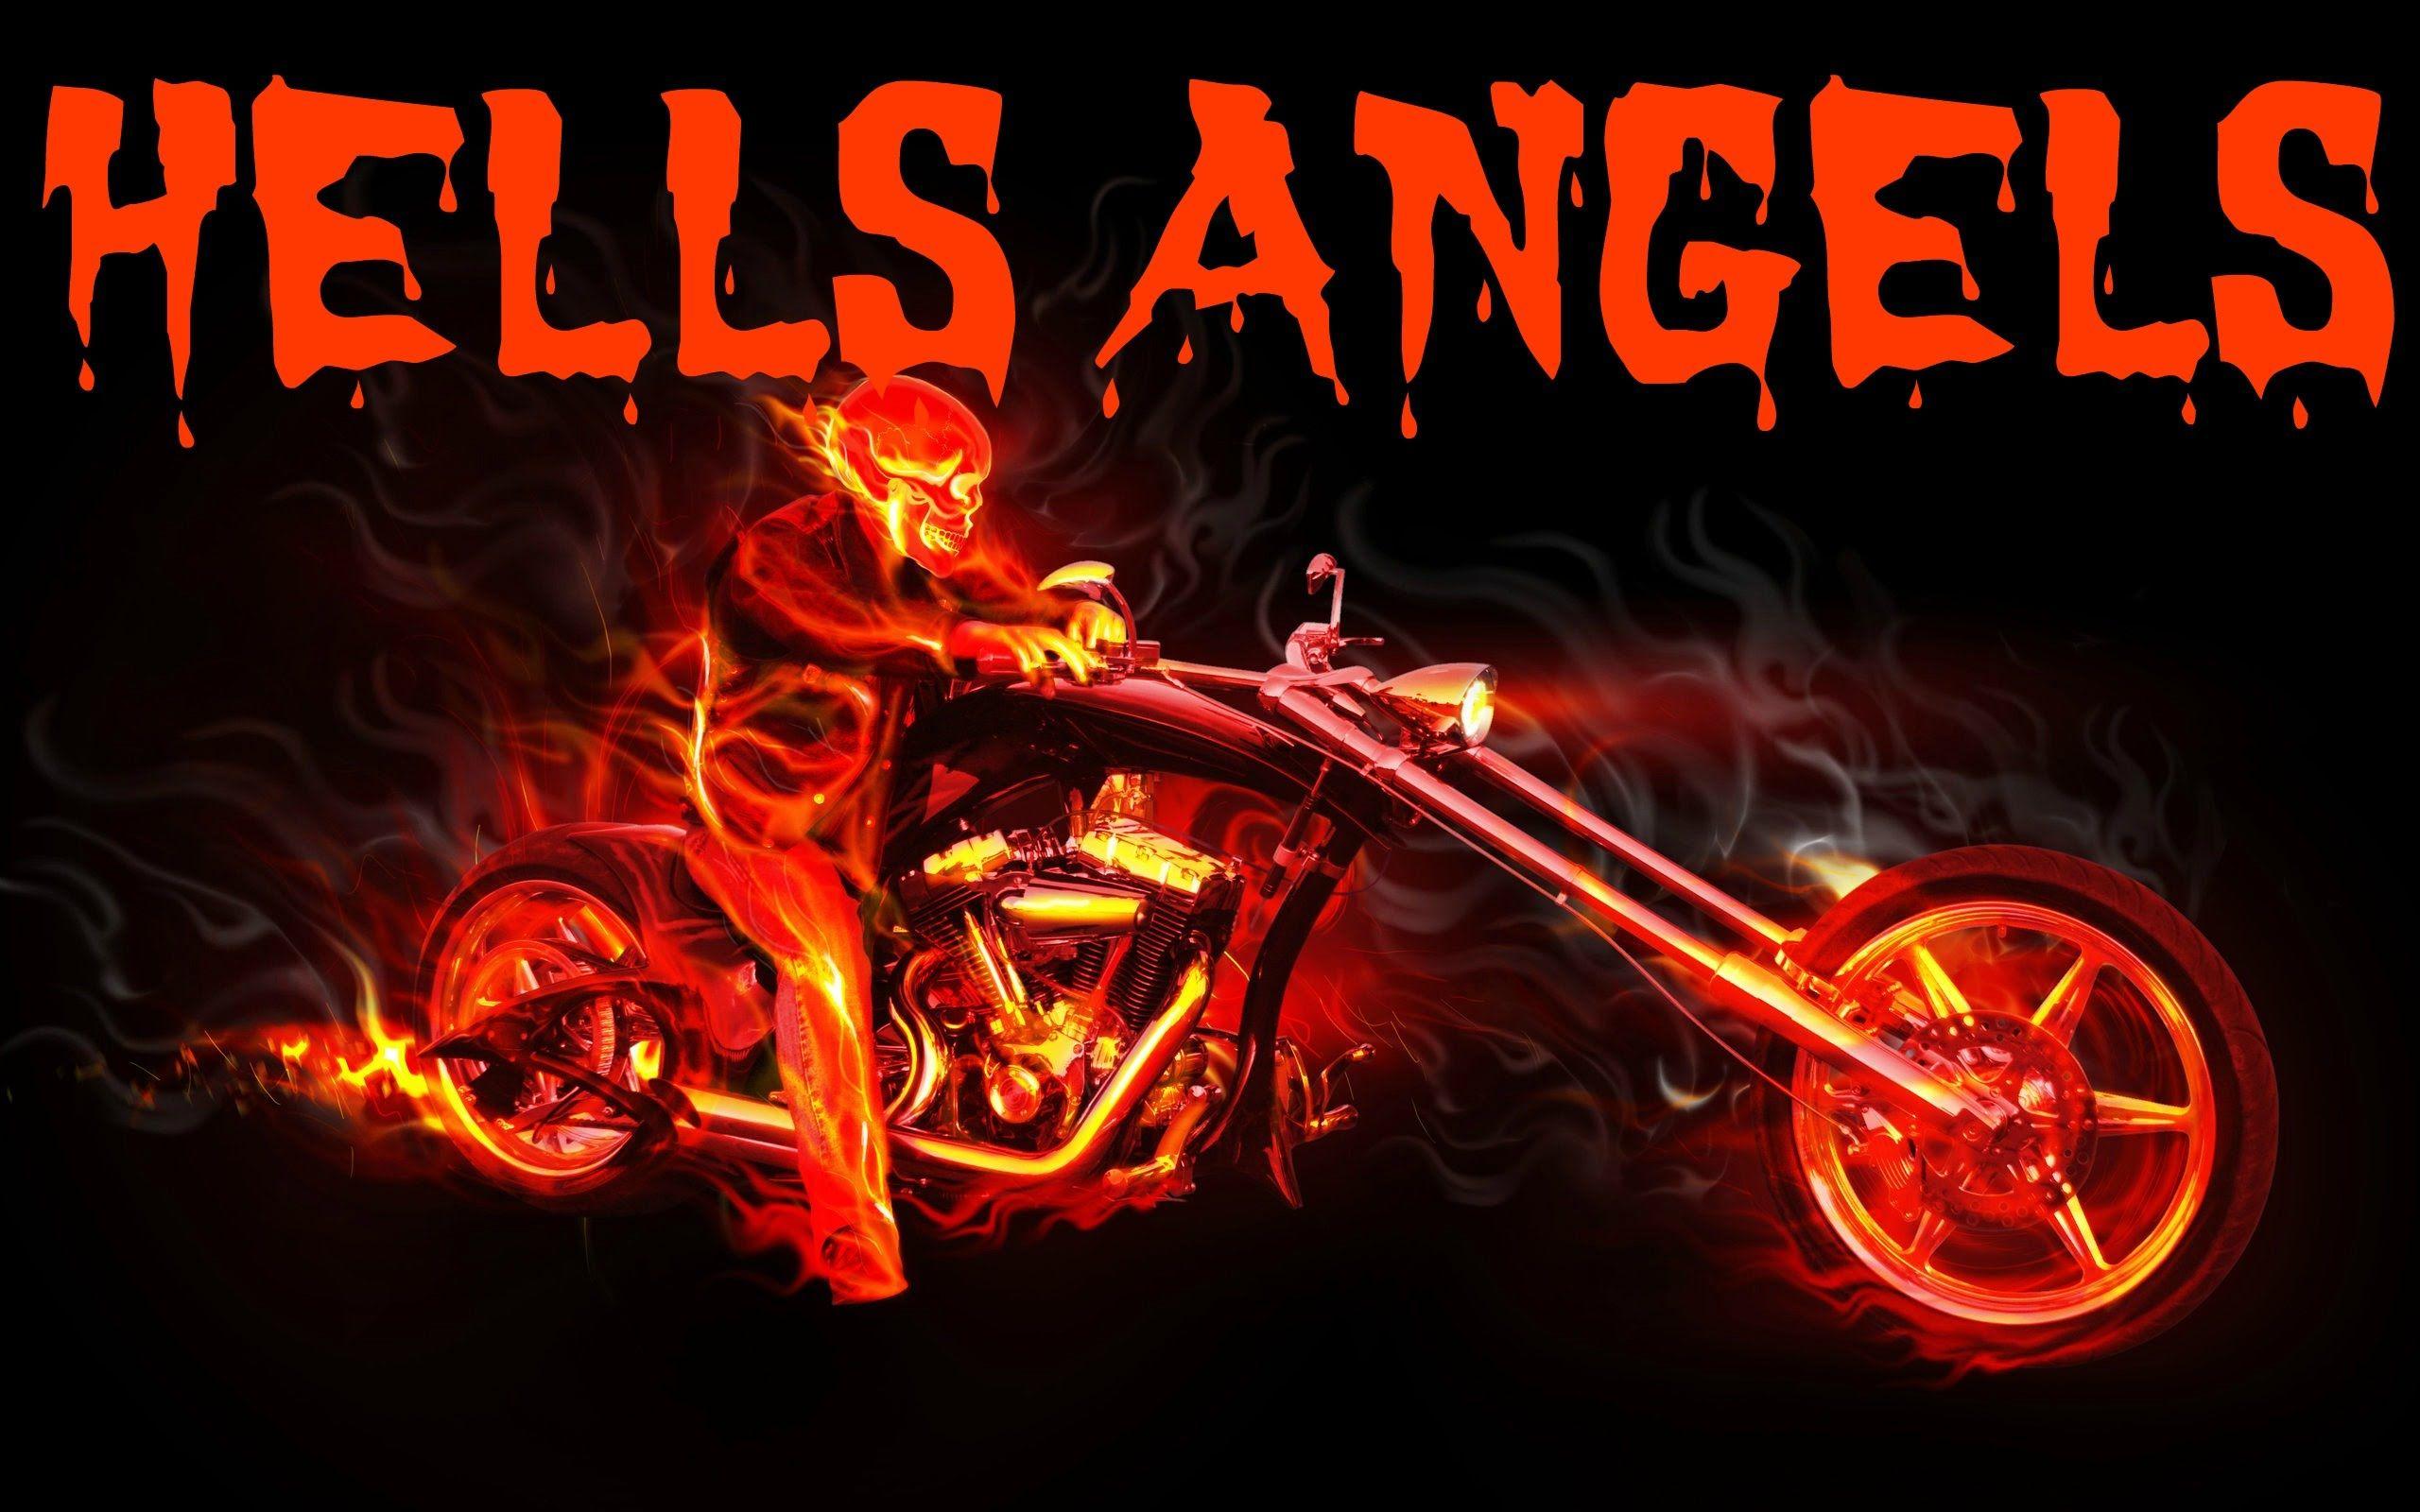 HELLS ANGELS INVADE EUROPE AT NIGHT!